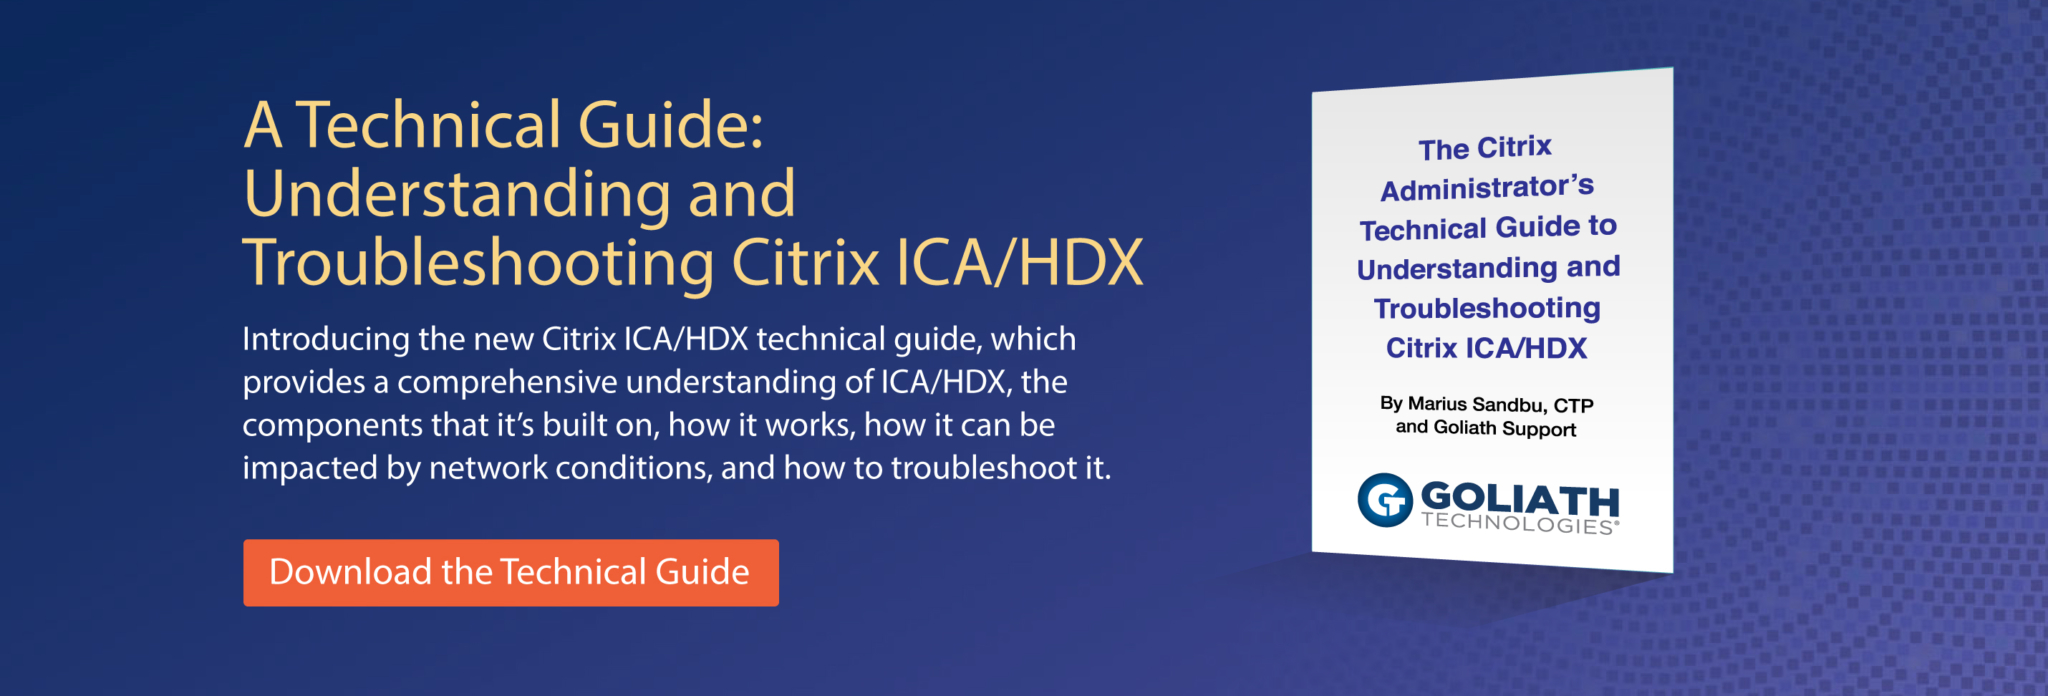 a technical guide for understanding and troubleshooting citrix ICA HDX